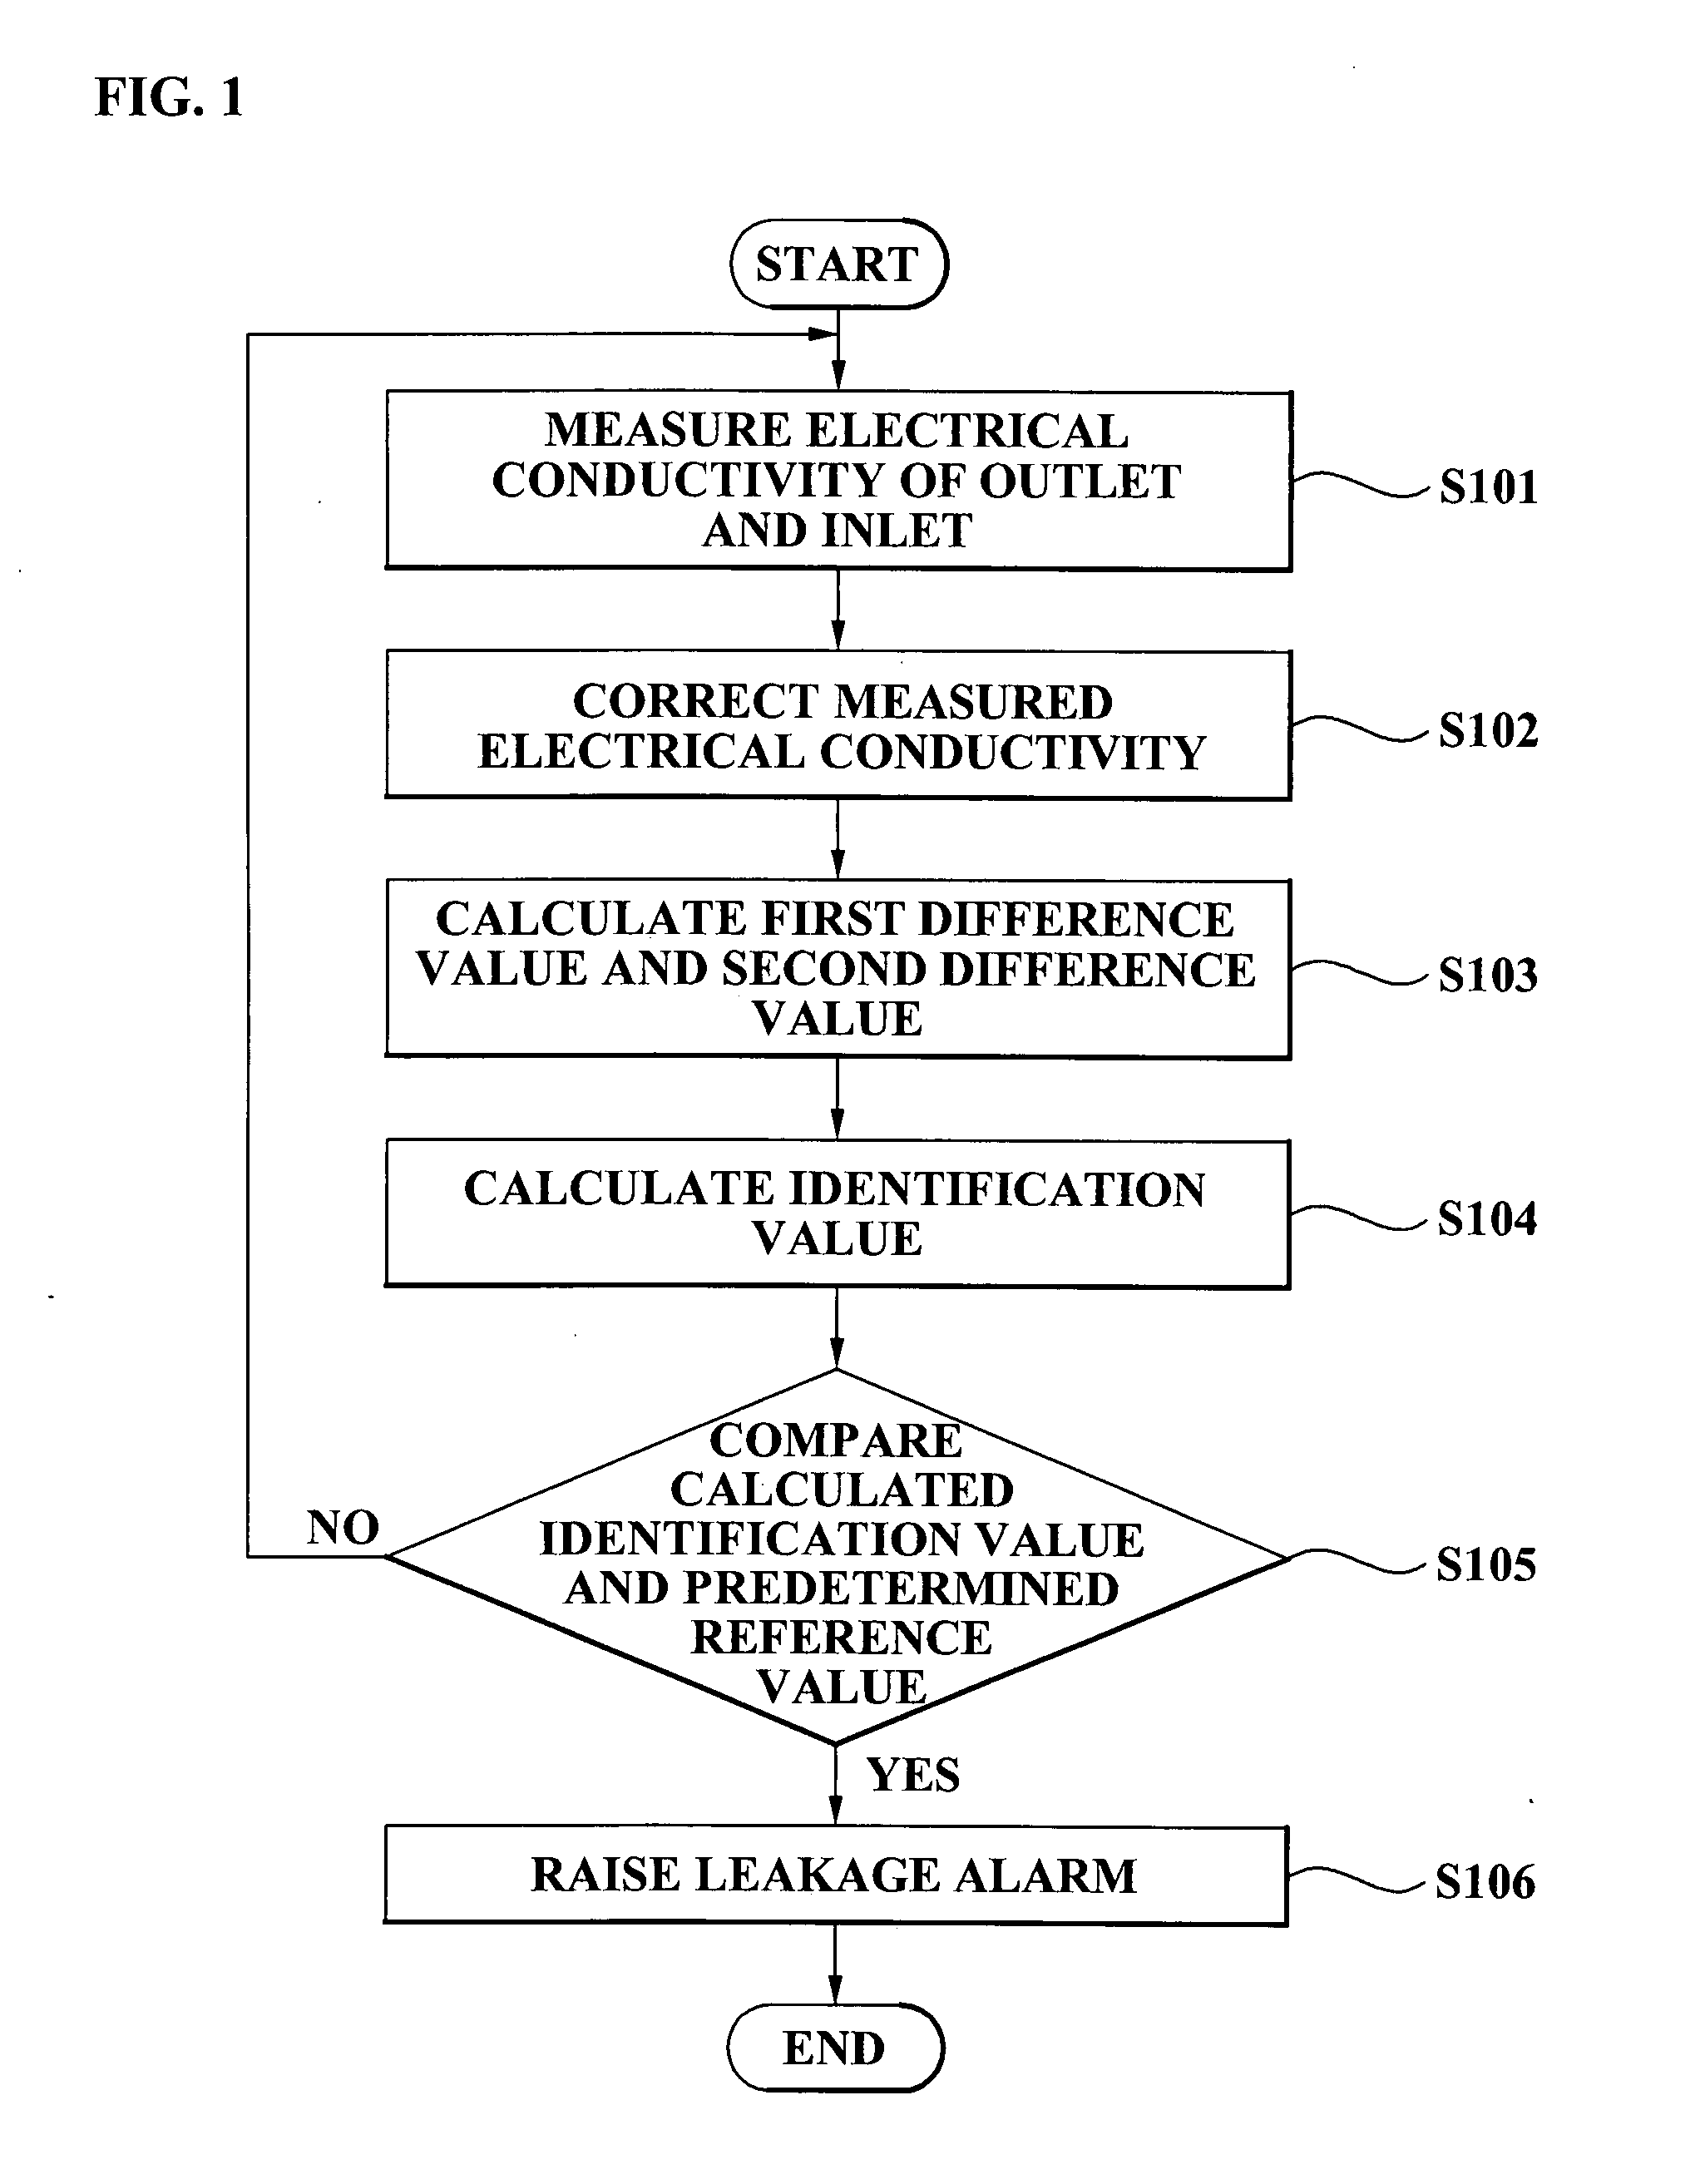 Method and system for early sensing of water leakage, through chemical concentration monitoring, in nuclear reactor system using liquid metal and molten salt